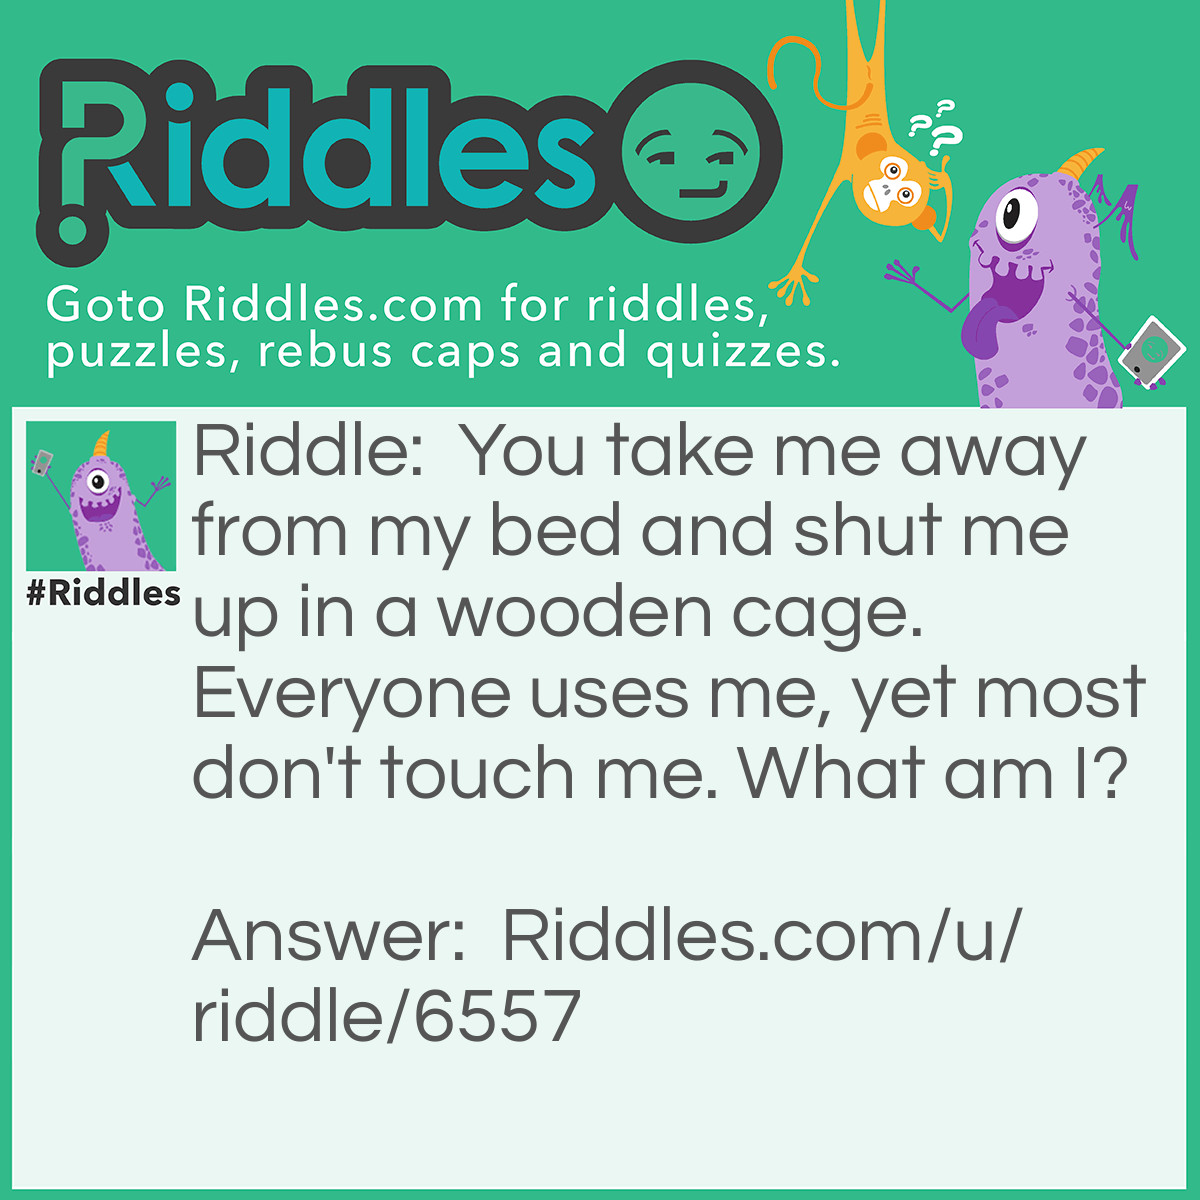 Riddle: You take me away from my bed and shut me up in a wooden cage. Everyone uses me, yet most don't touch me. What am I? Answer: Pencil lead!